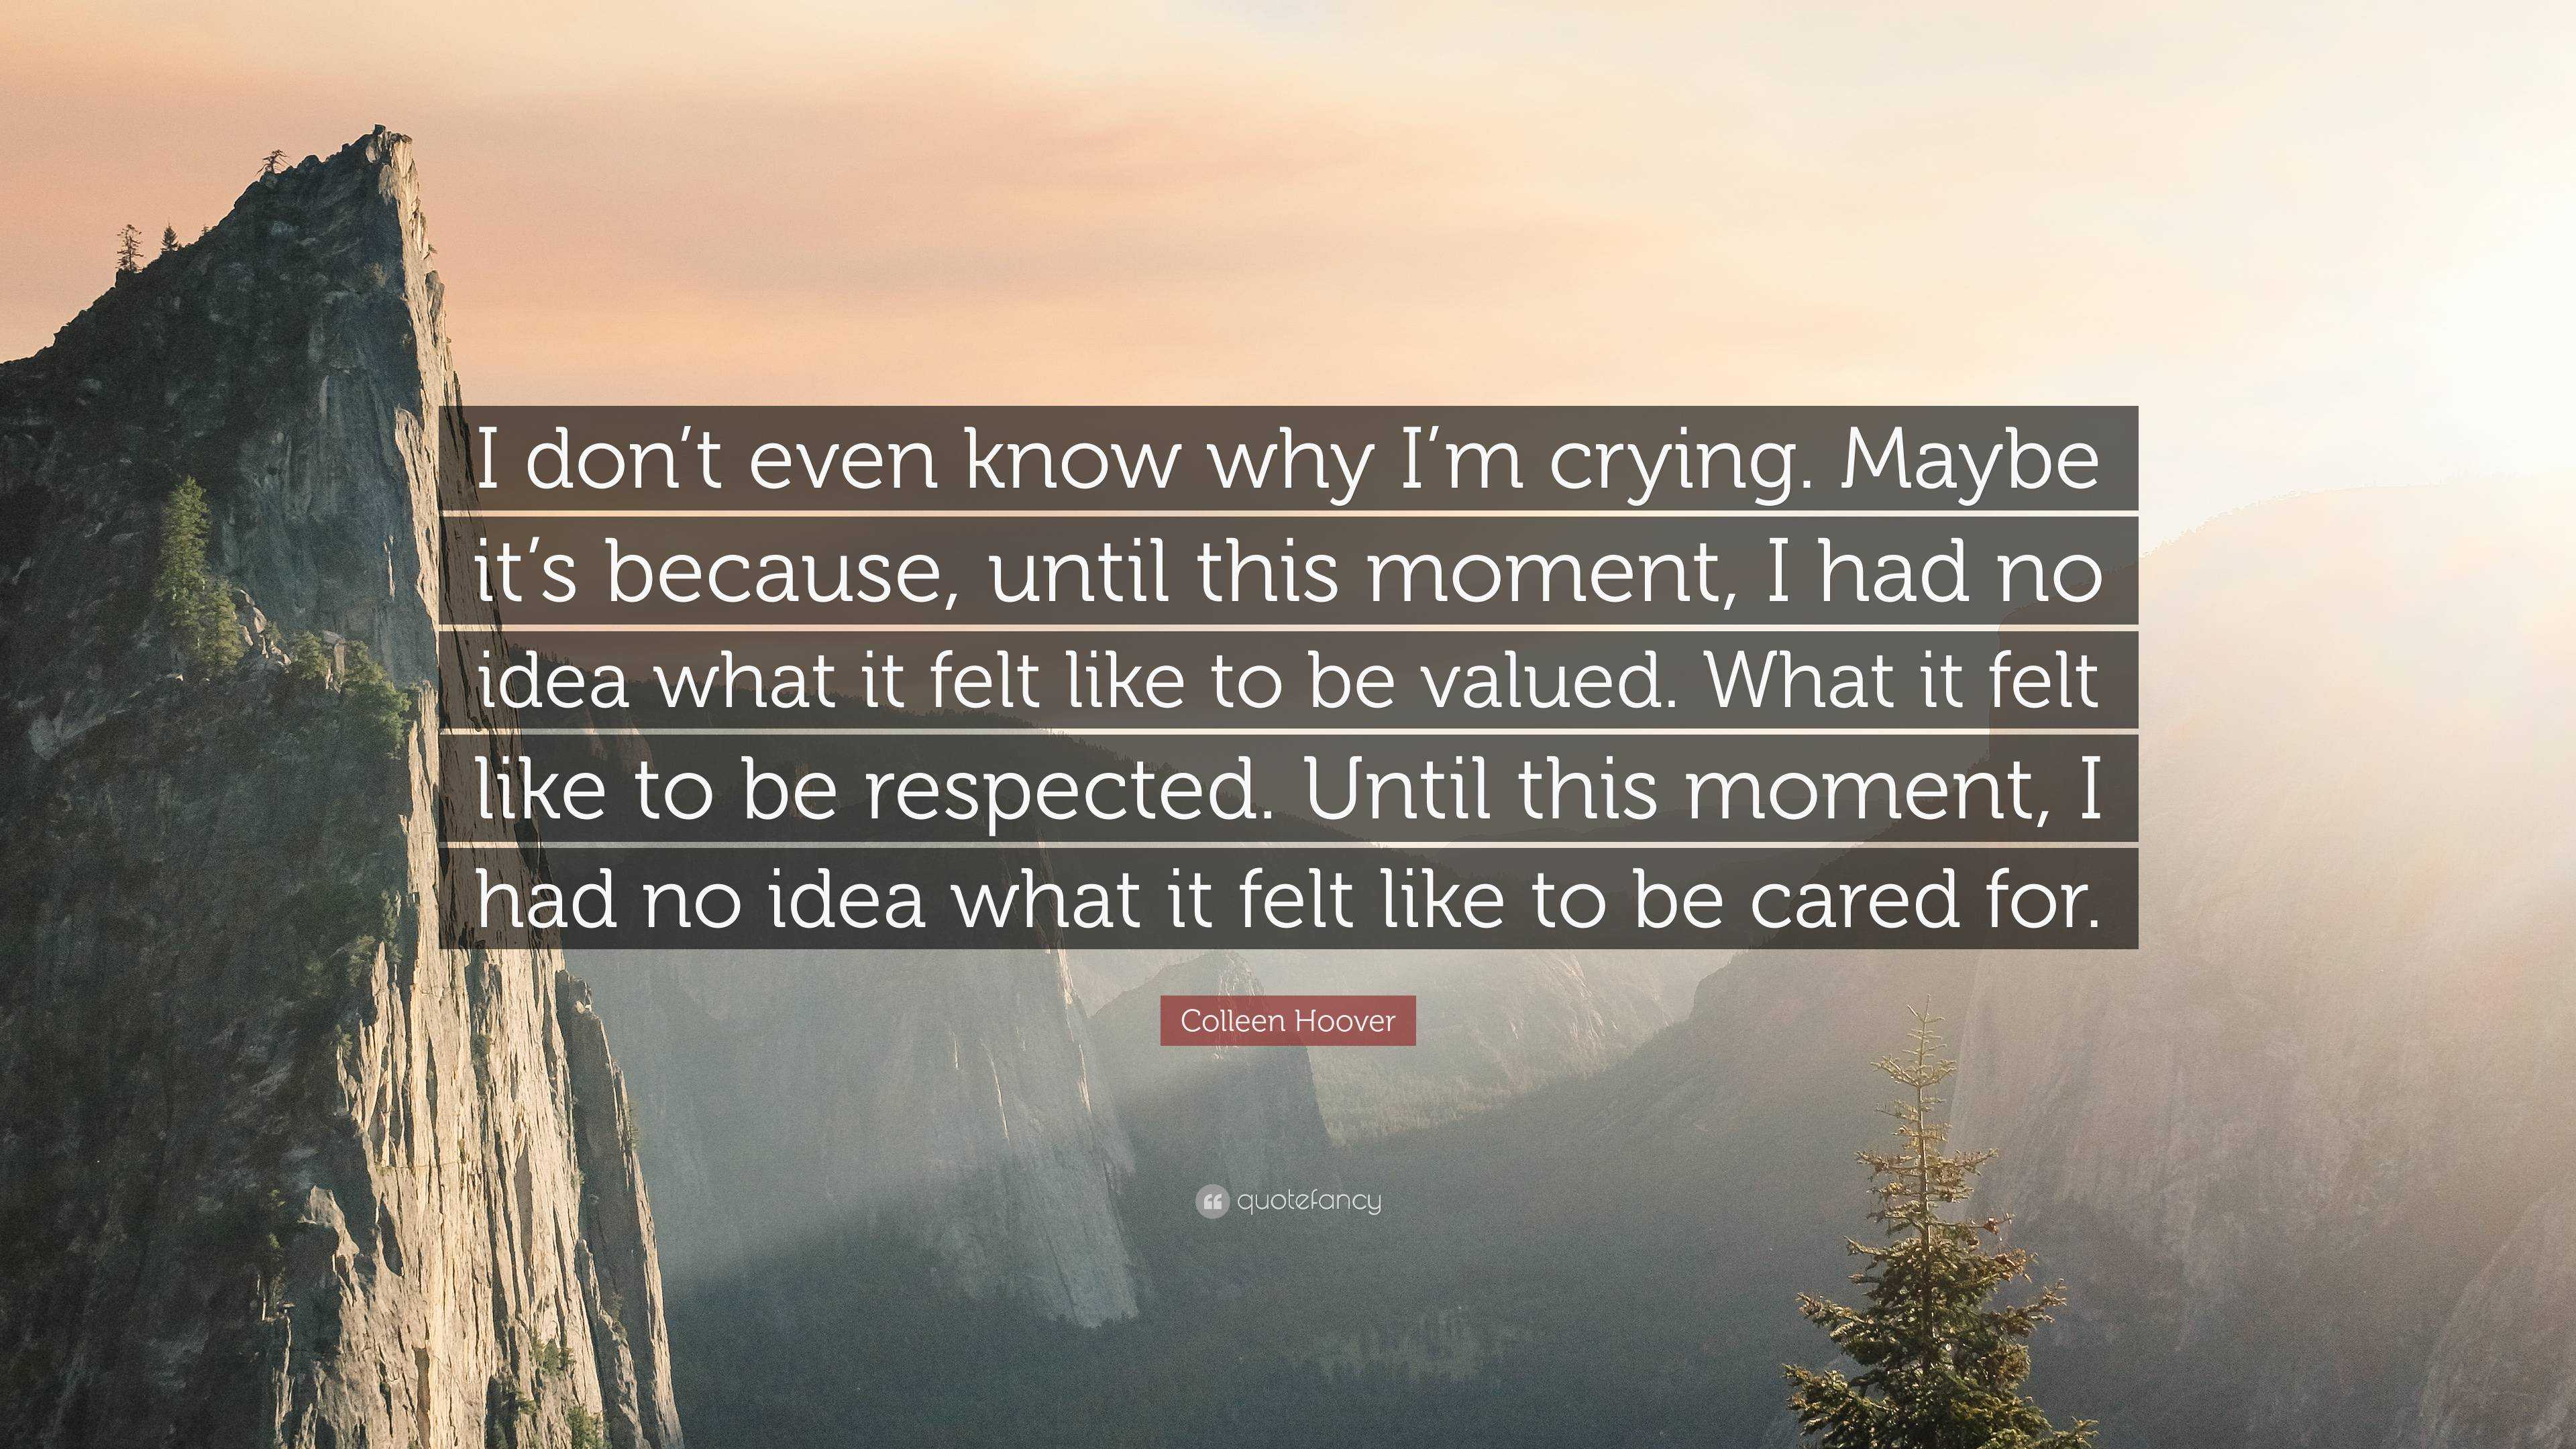 Colleen Hoover Quote I Don T Even Know Why I M Crying Maybe It S Because Until This Moment I Had No Idea What It Felt Like To Be Valued W